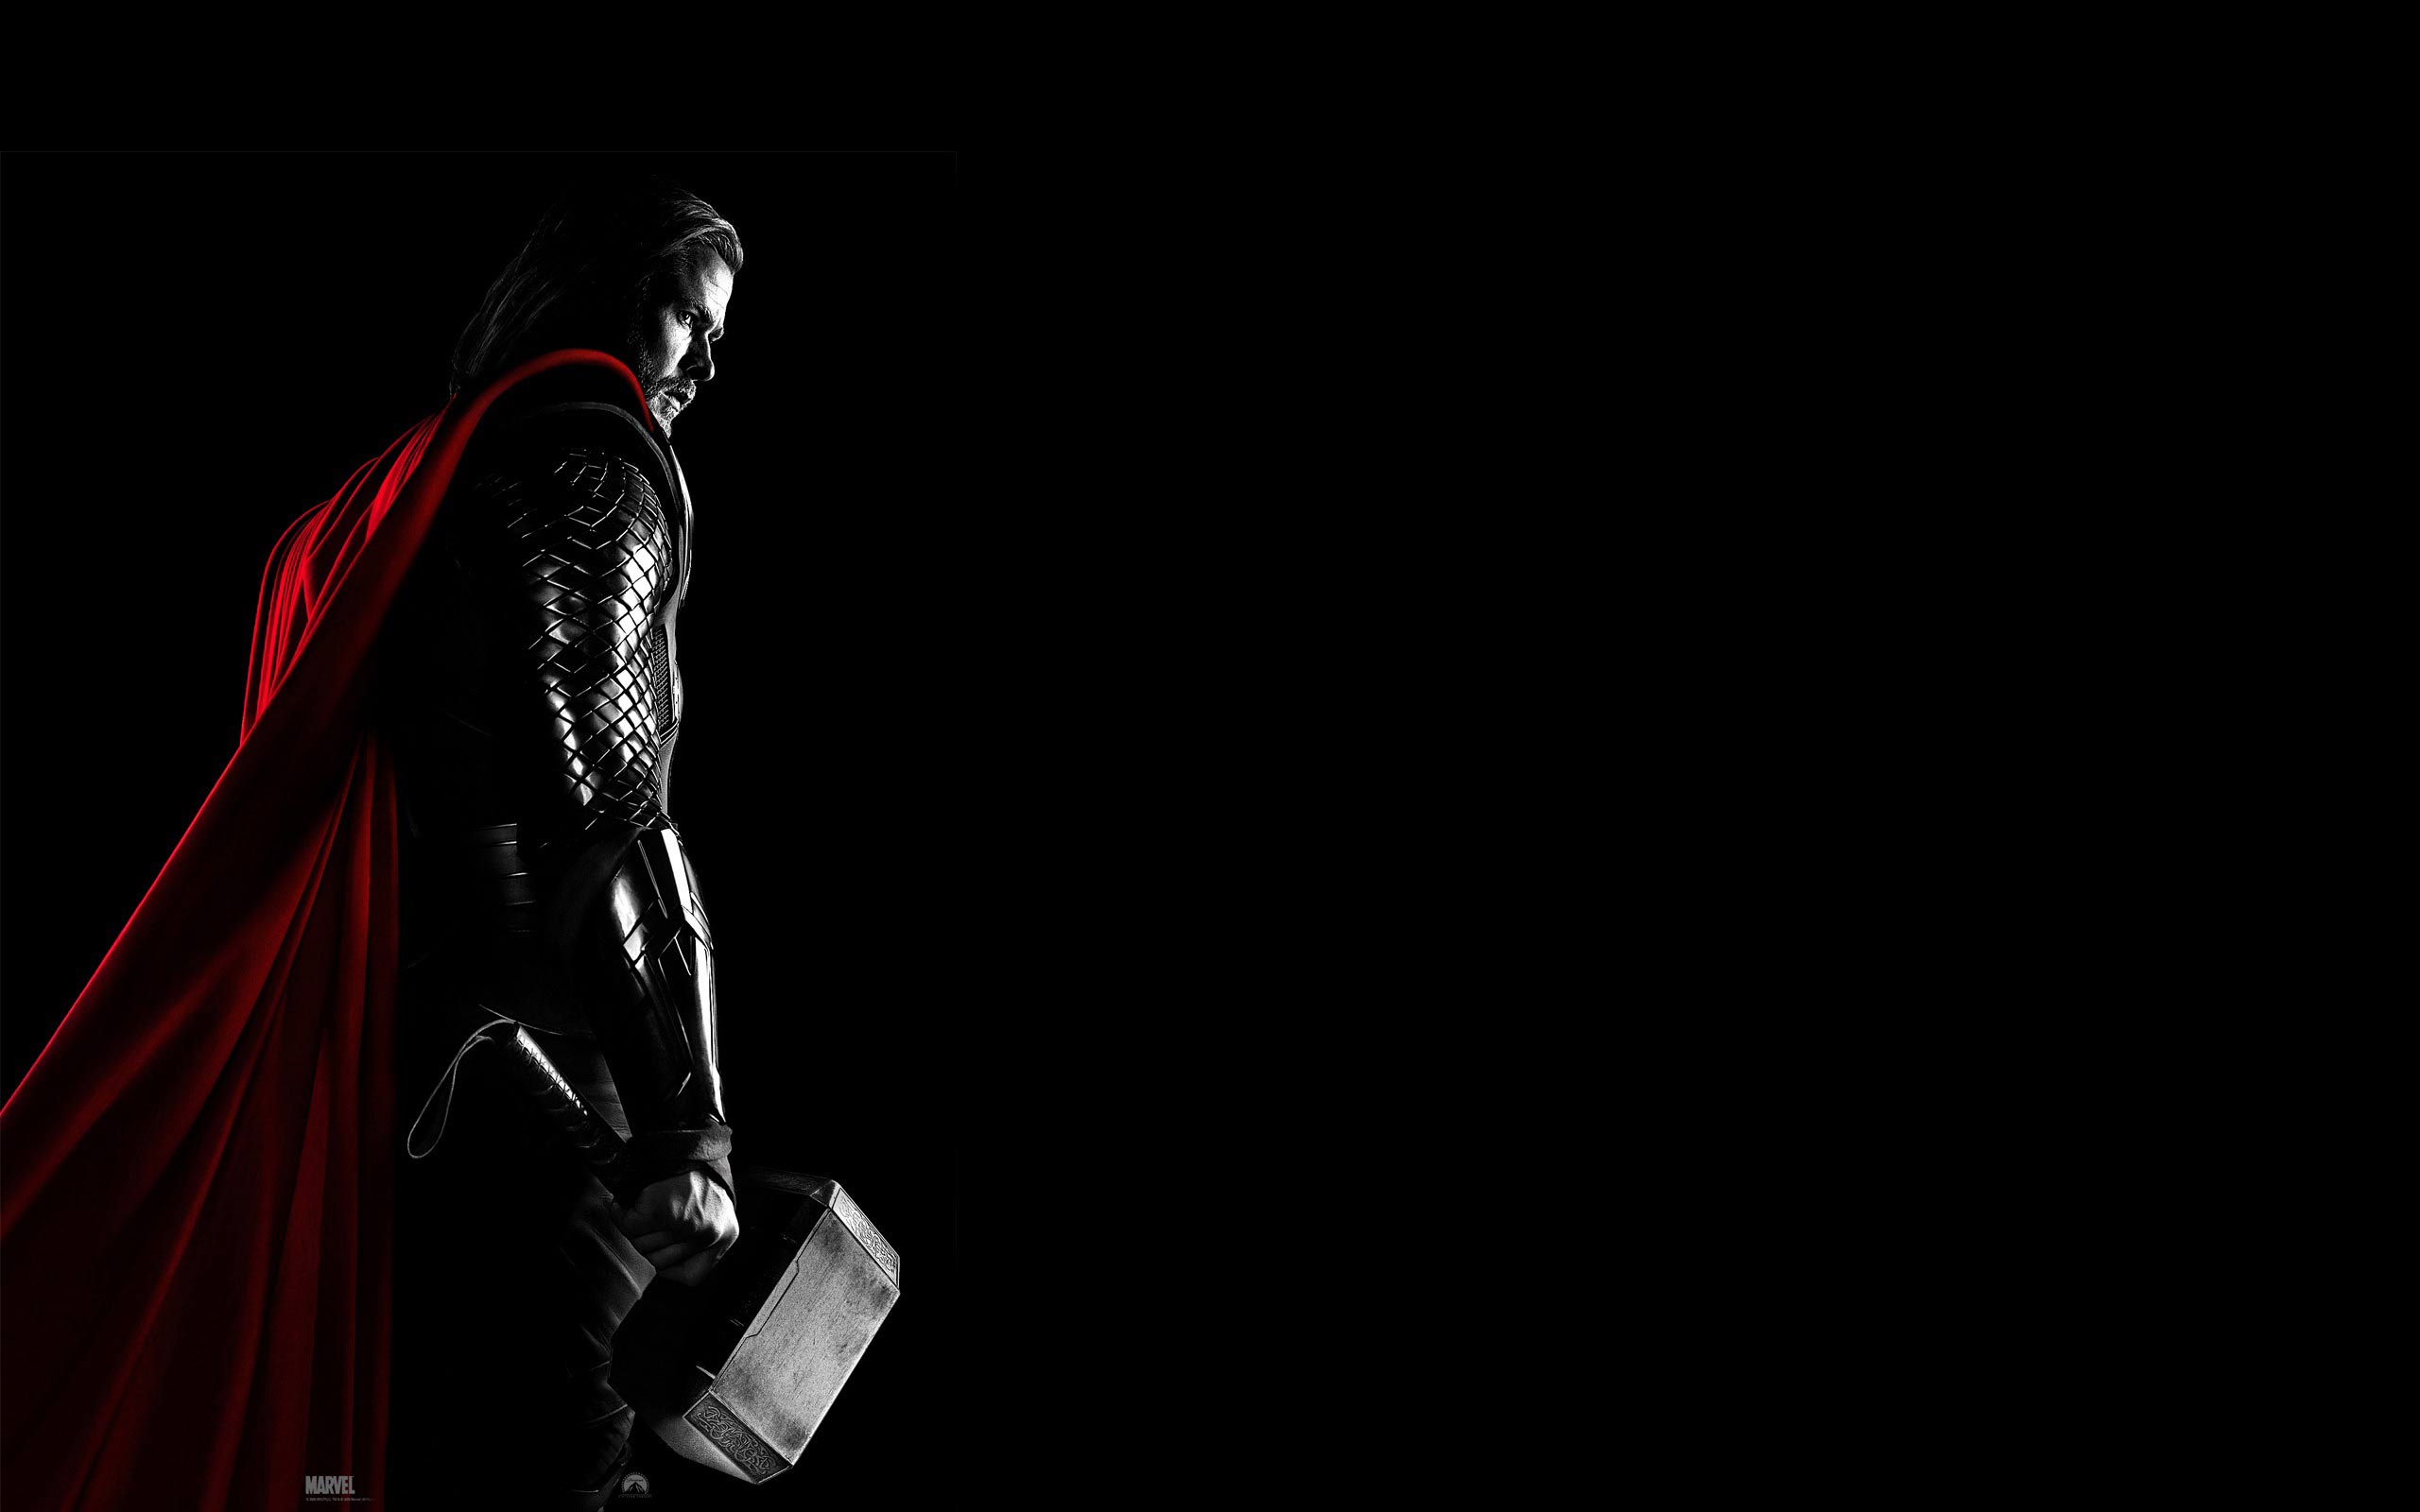 Thor 2 Wallpapers and Desktop Backgrounds | Thor 2 Movie Wallpapers